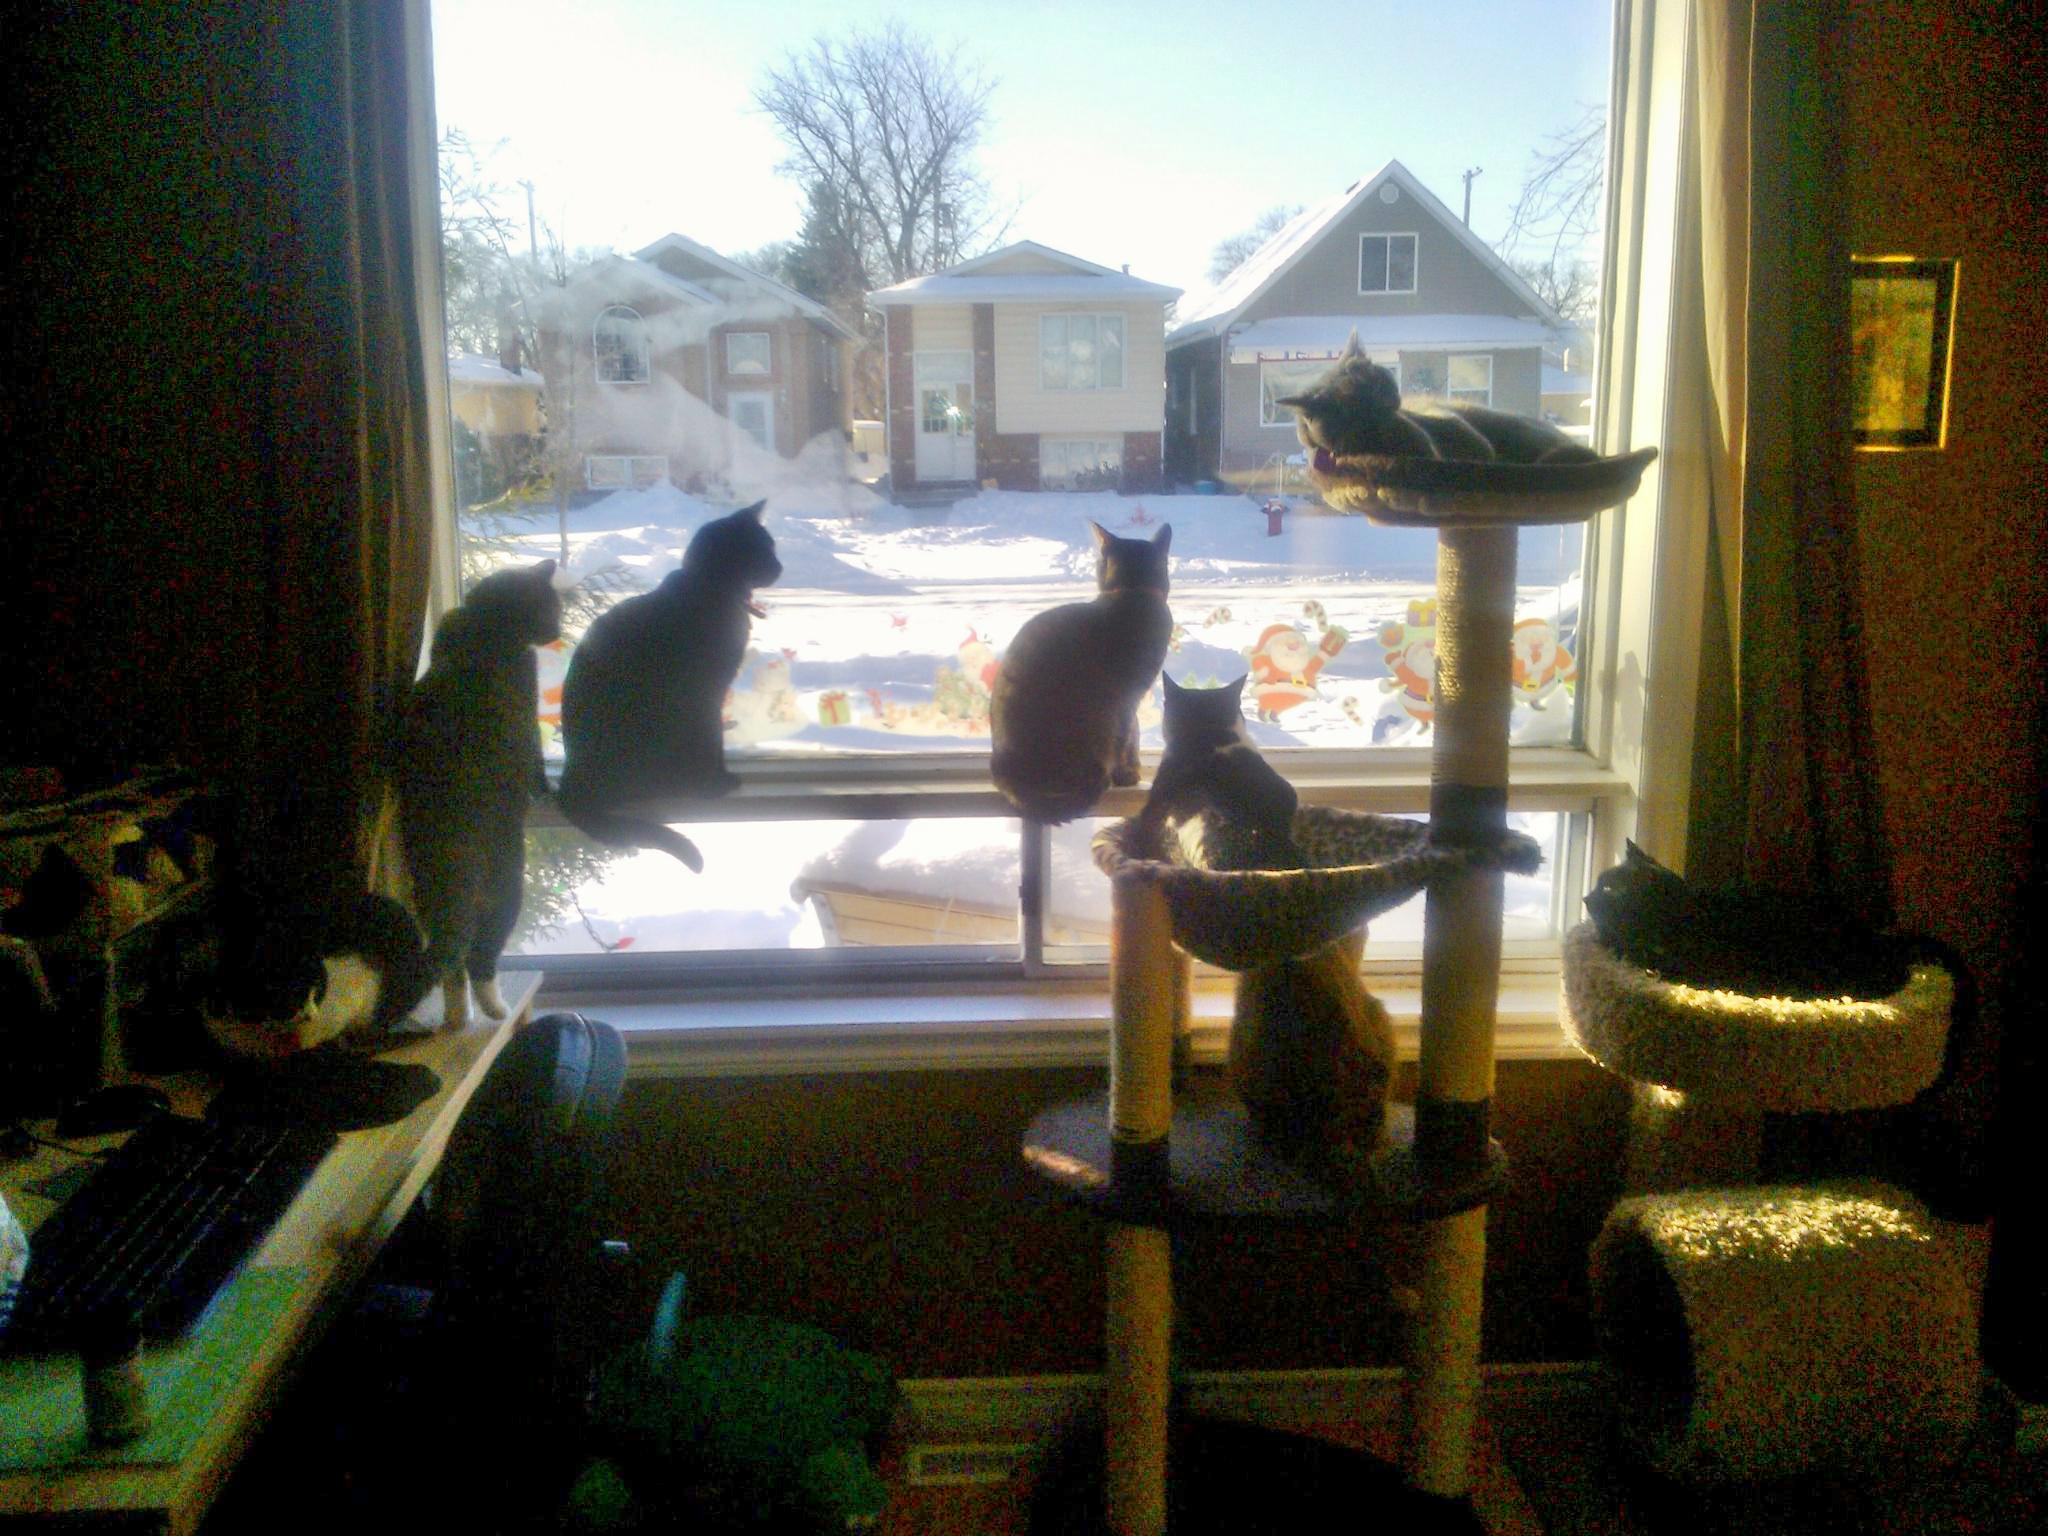 All 8 At The Window